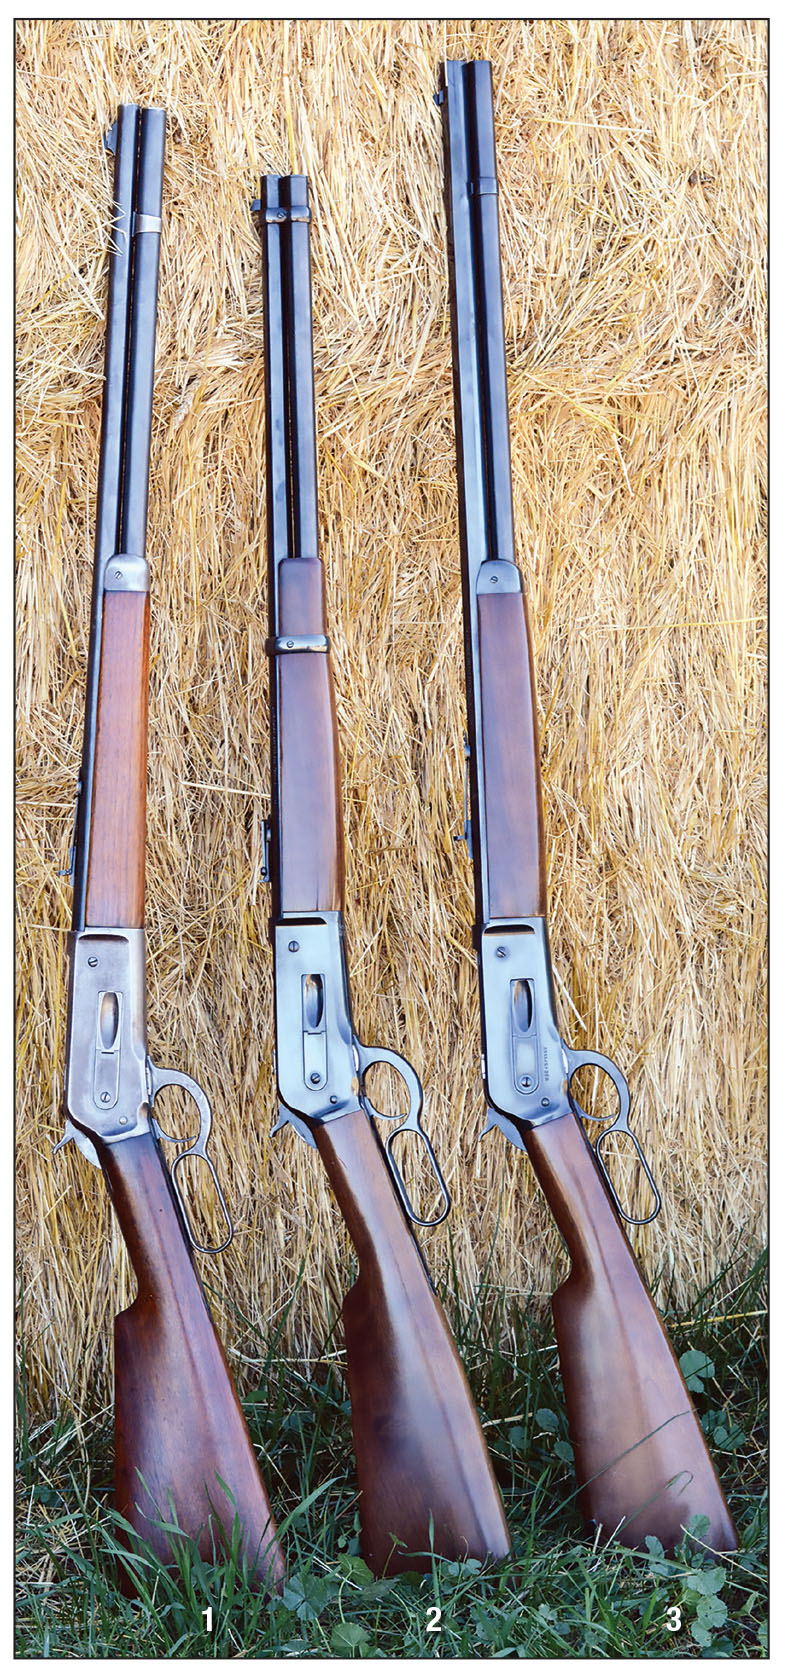 The Winchester Model 1886 was popular on the frontier and proved highly reliable and accurate: (1) original Winchester 1886, (2) Browning/Miroku 1886 Saddle Ring Carbine and (3) Browning Model 1886 rifle.